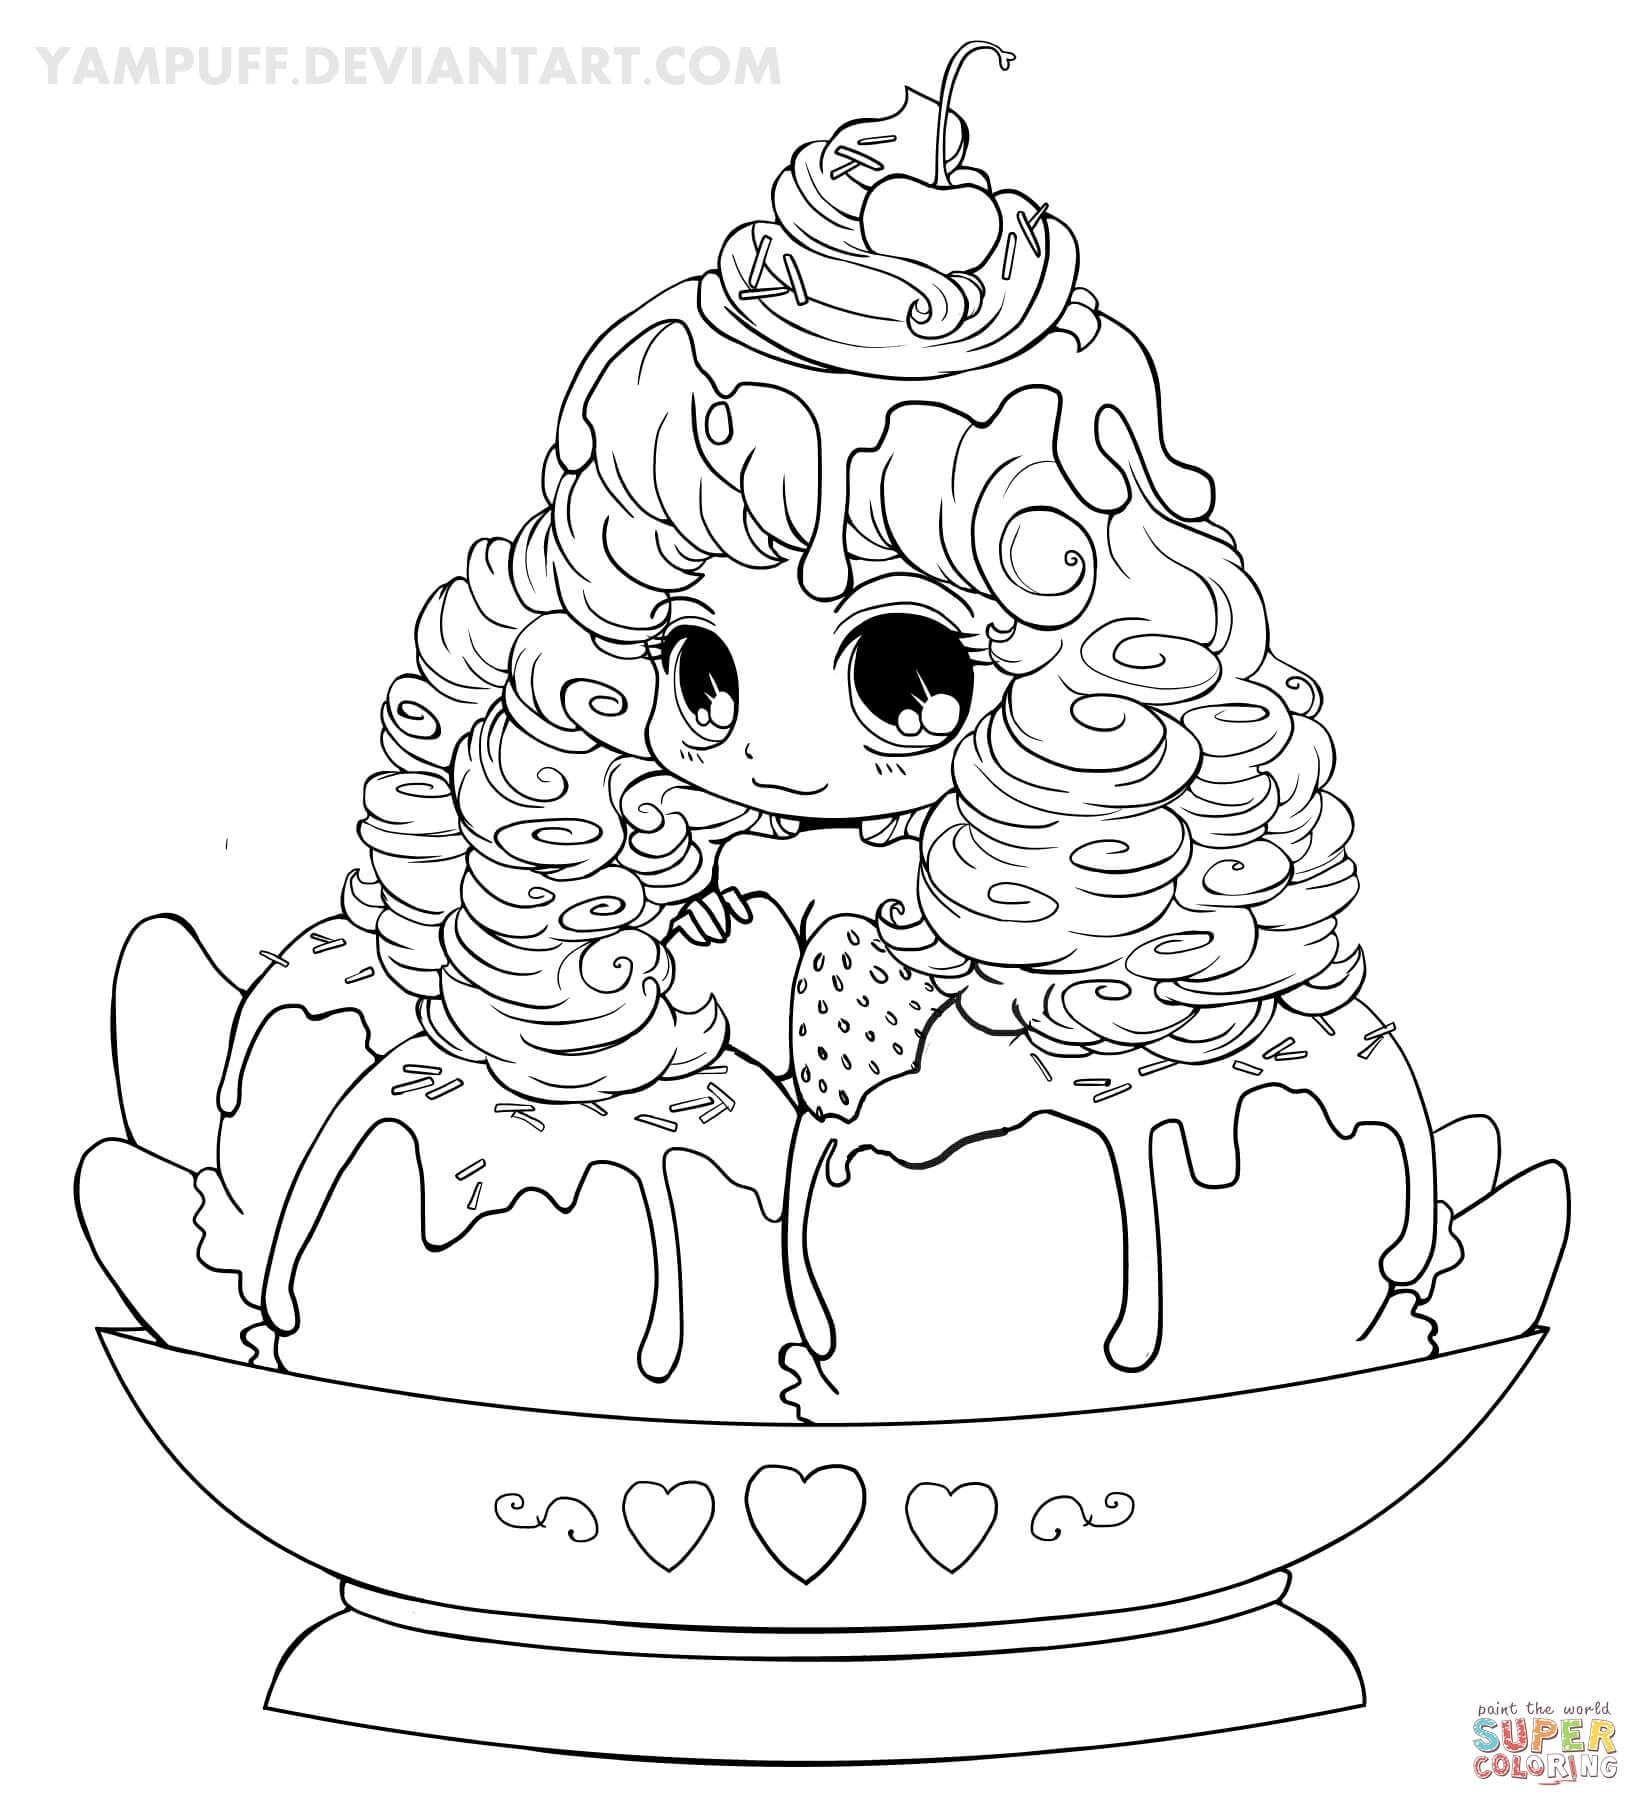 Chibi Lollipop Girl coloring page | Free Printable Coloring Pages